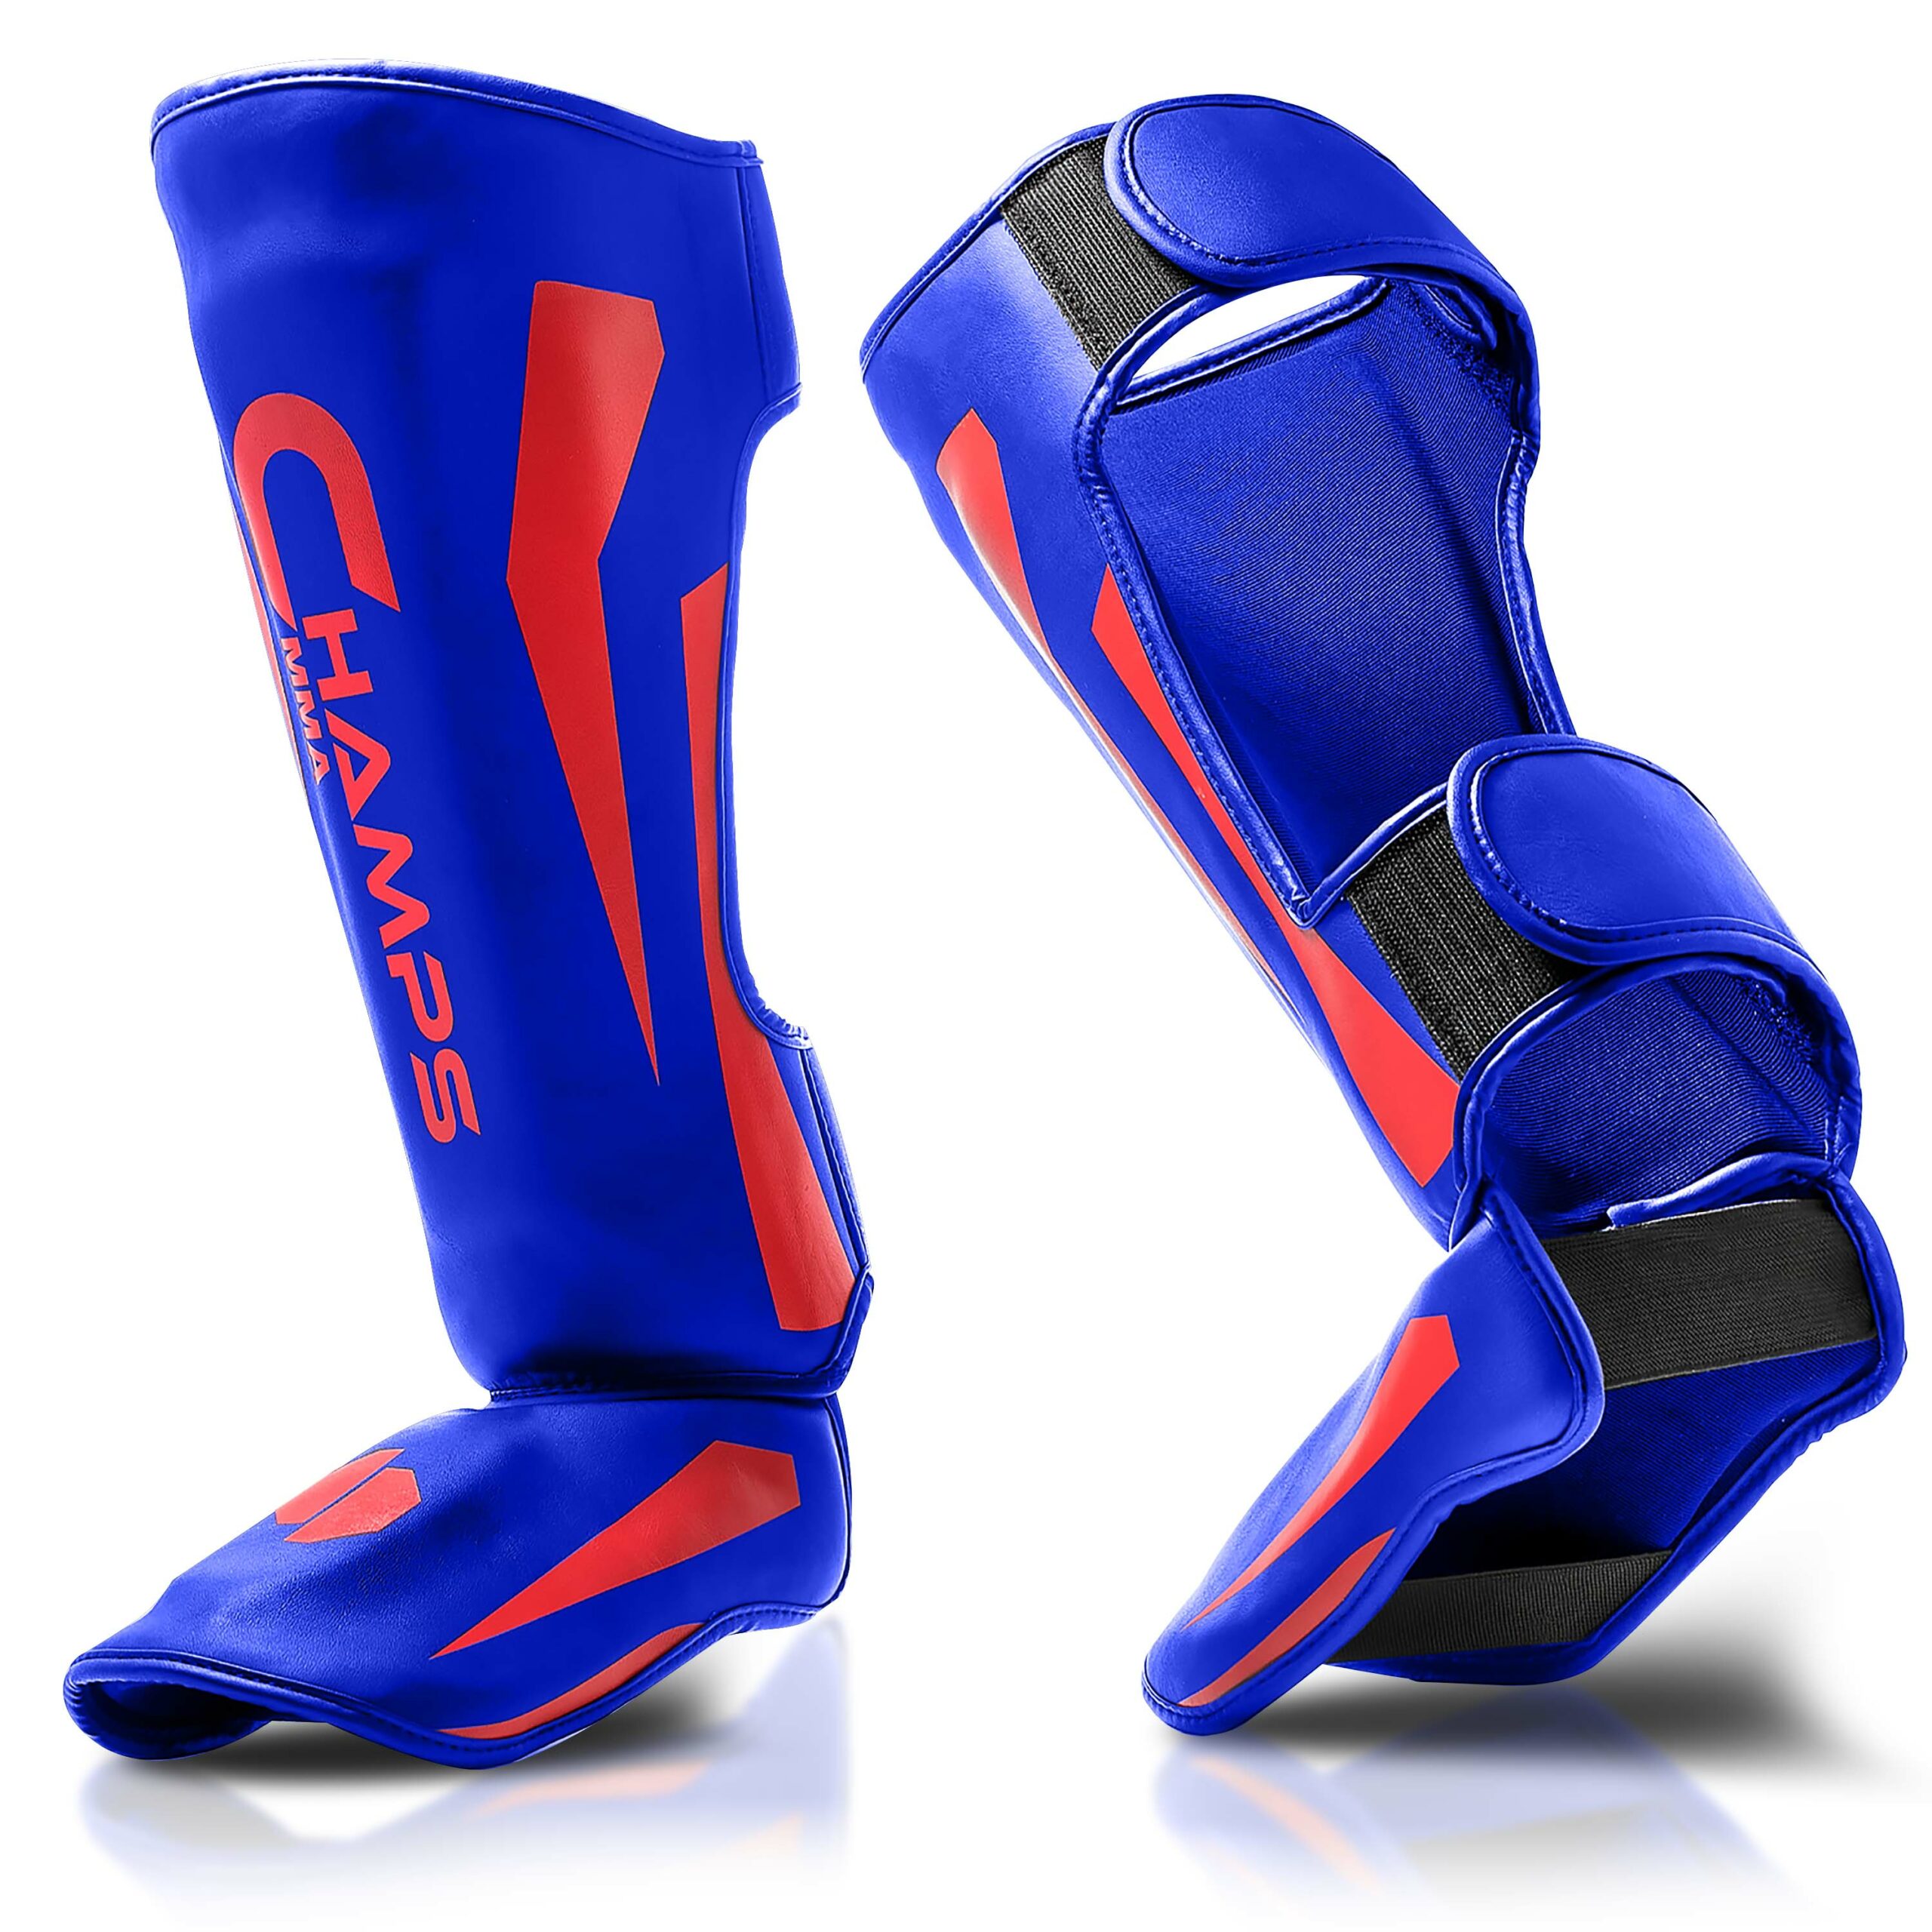 MMA Shin Guards, Pads & Protection